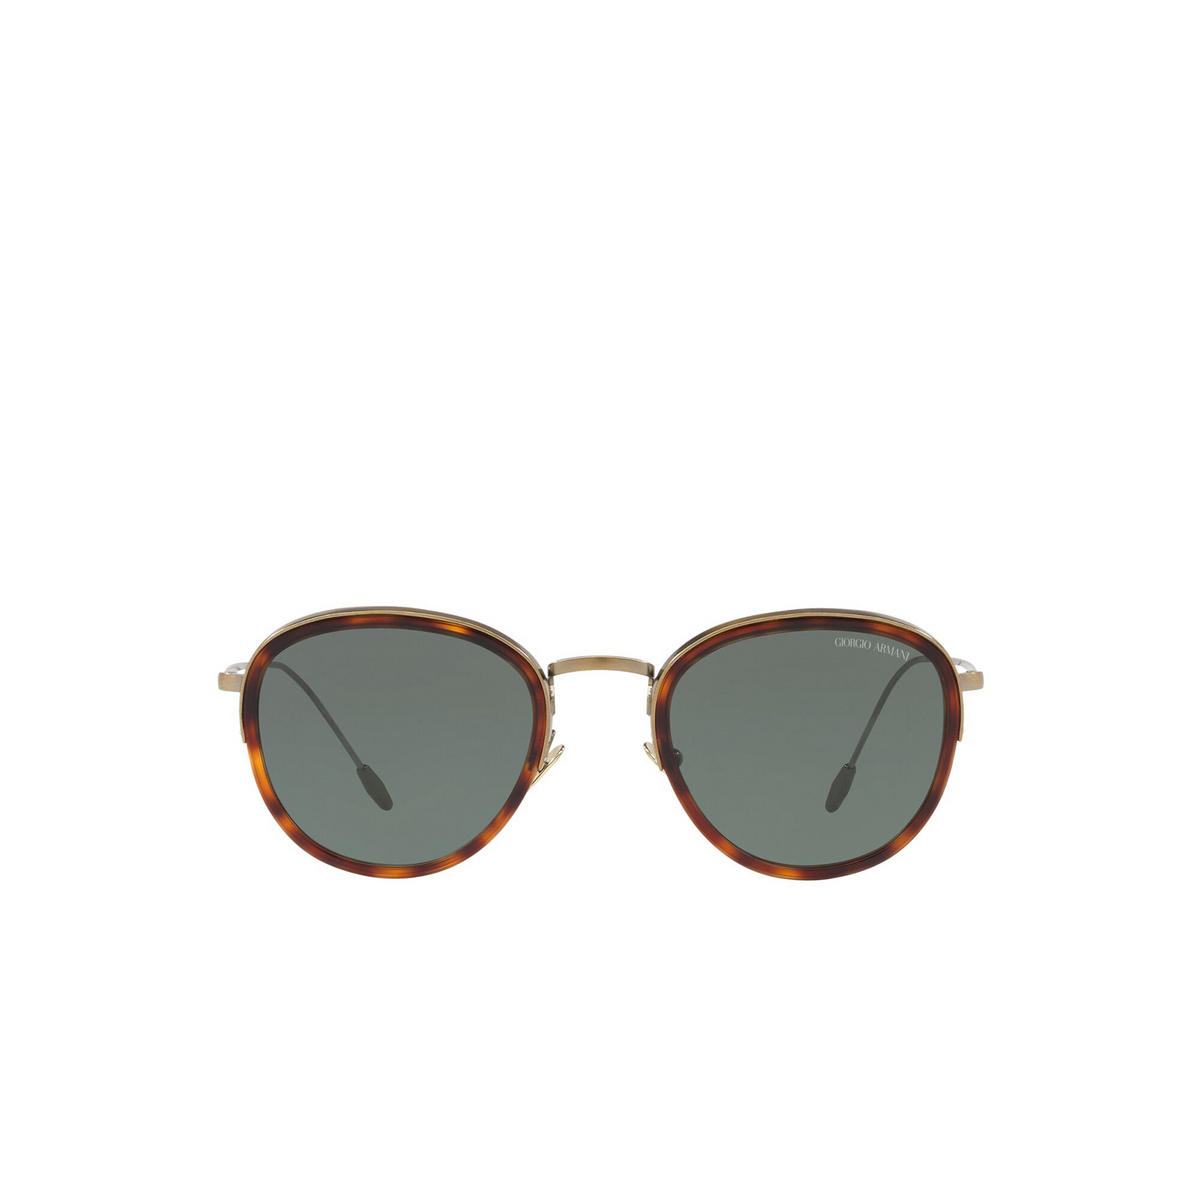 Giorgio Armani® Round Sunglasses: AR6103J color Brushed Pale Gold 319871 - front view.